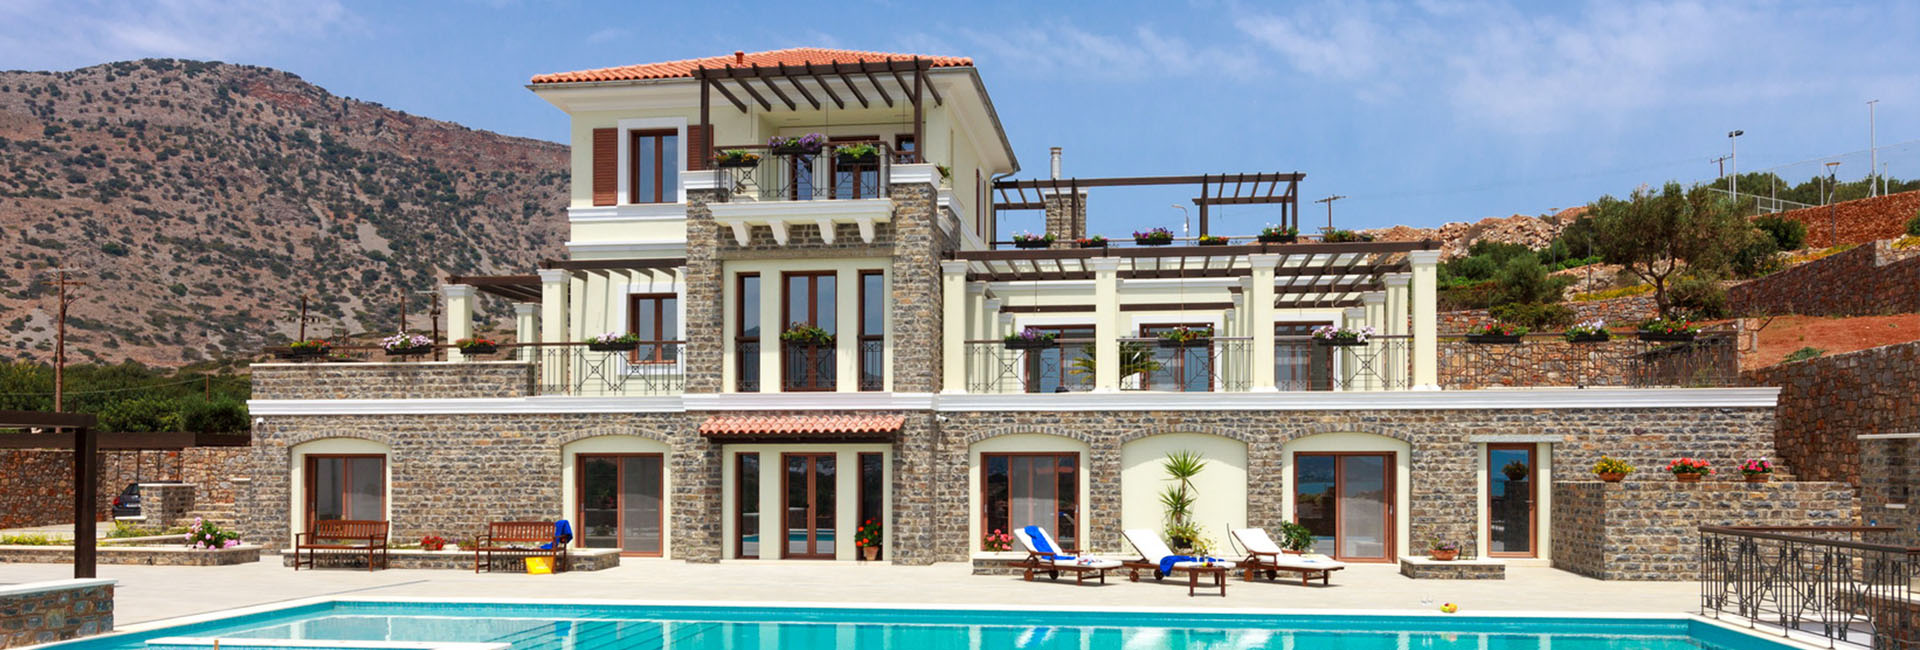 Olympos Real Estate Construction